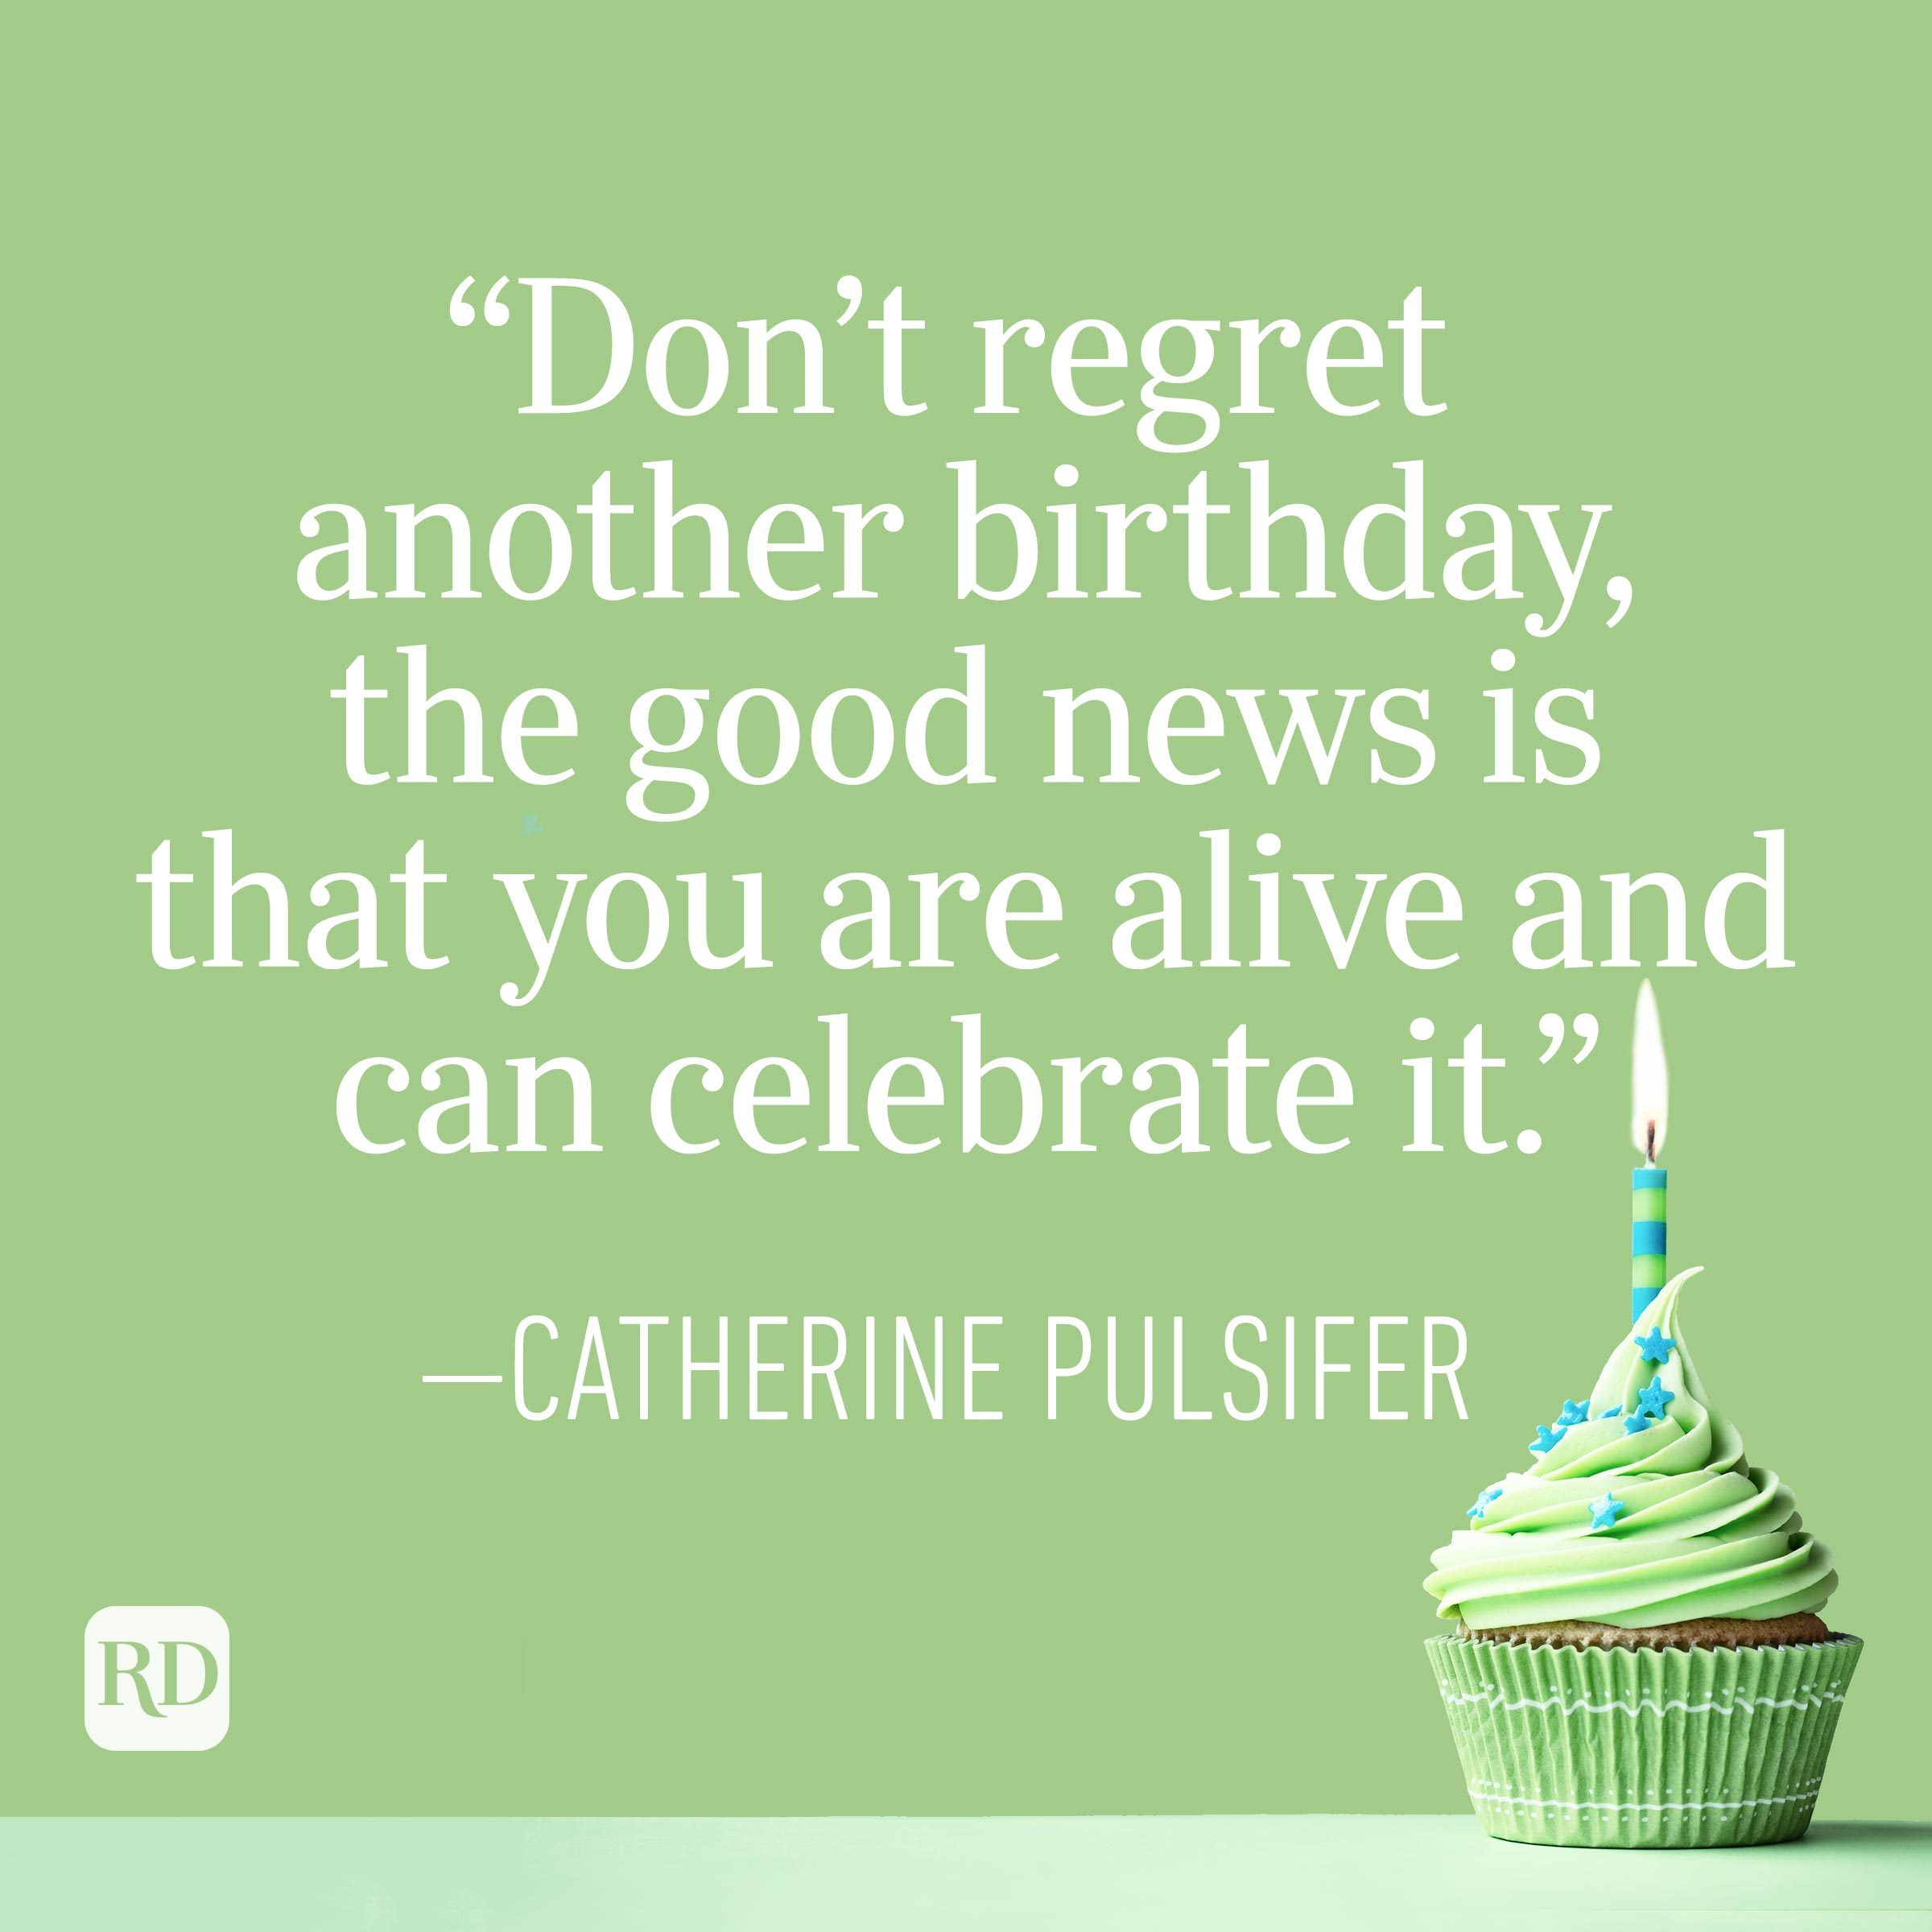 "Don't regret another birthday, the good news is that you are alive and can celebrate it." —Catherine Pulsifer